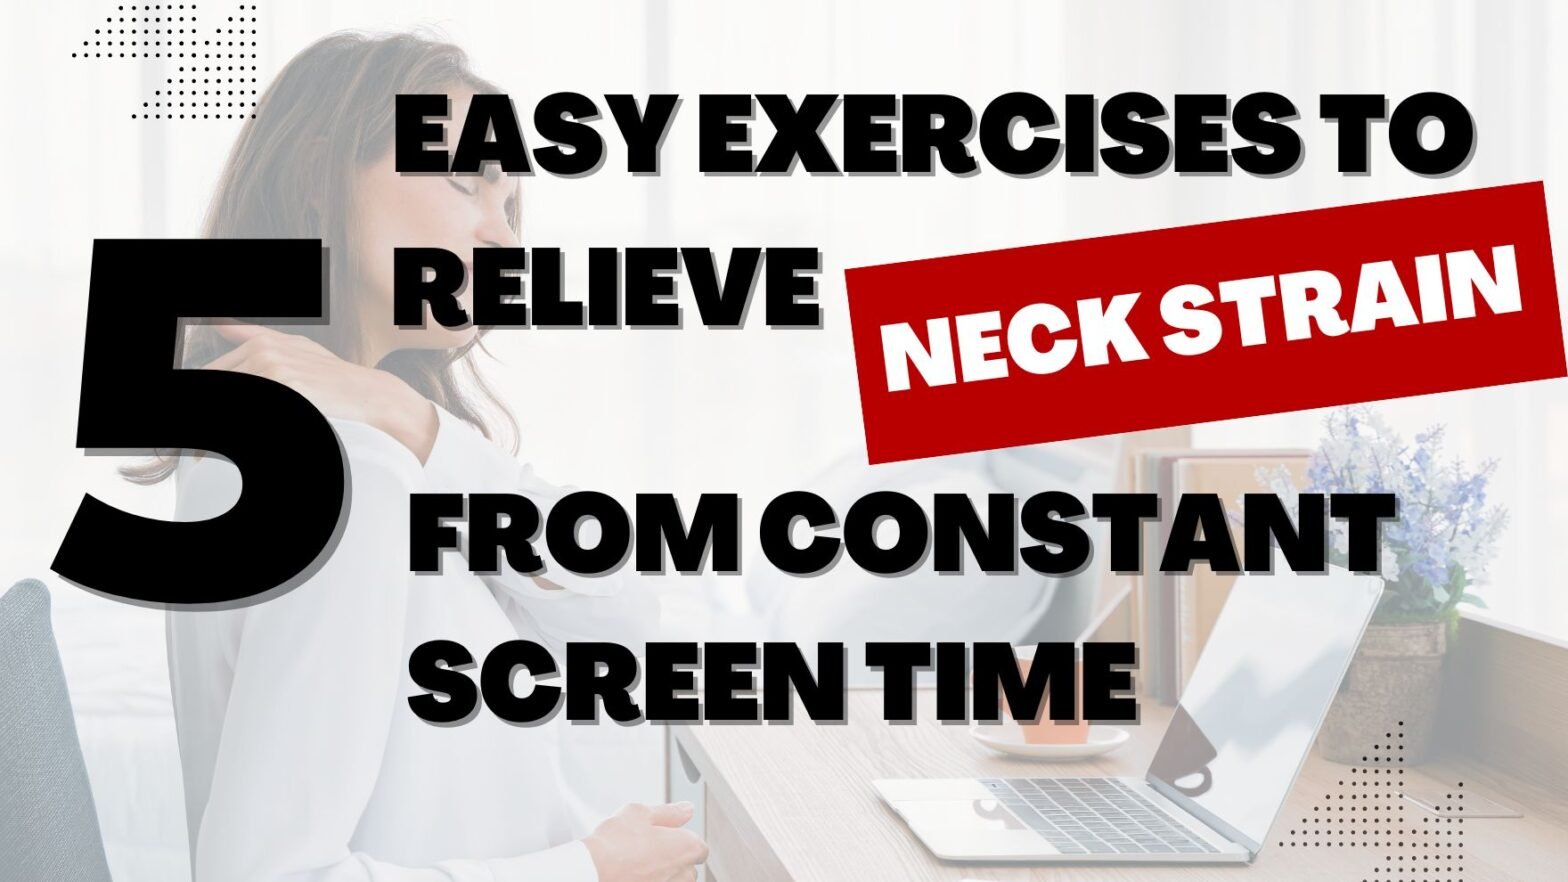 Corporate Wellness Programs - 5 easy exercises to relieve neck strain from constant screen time